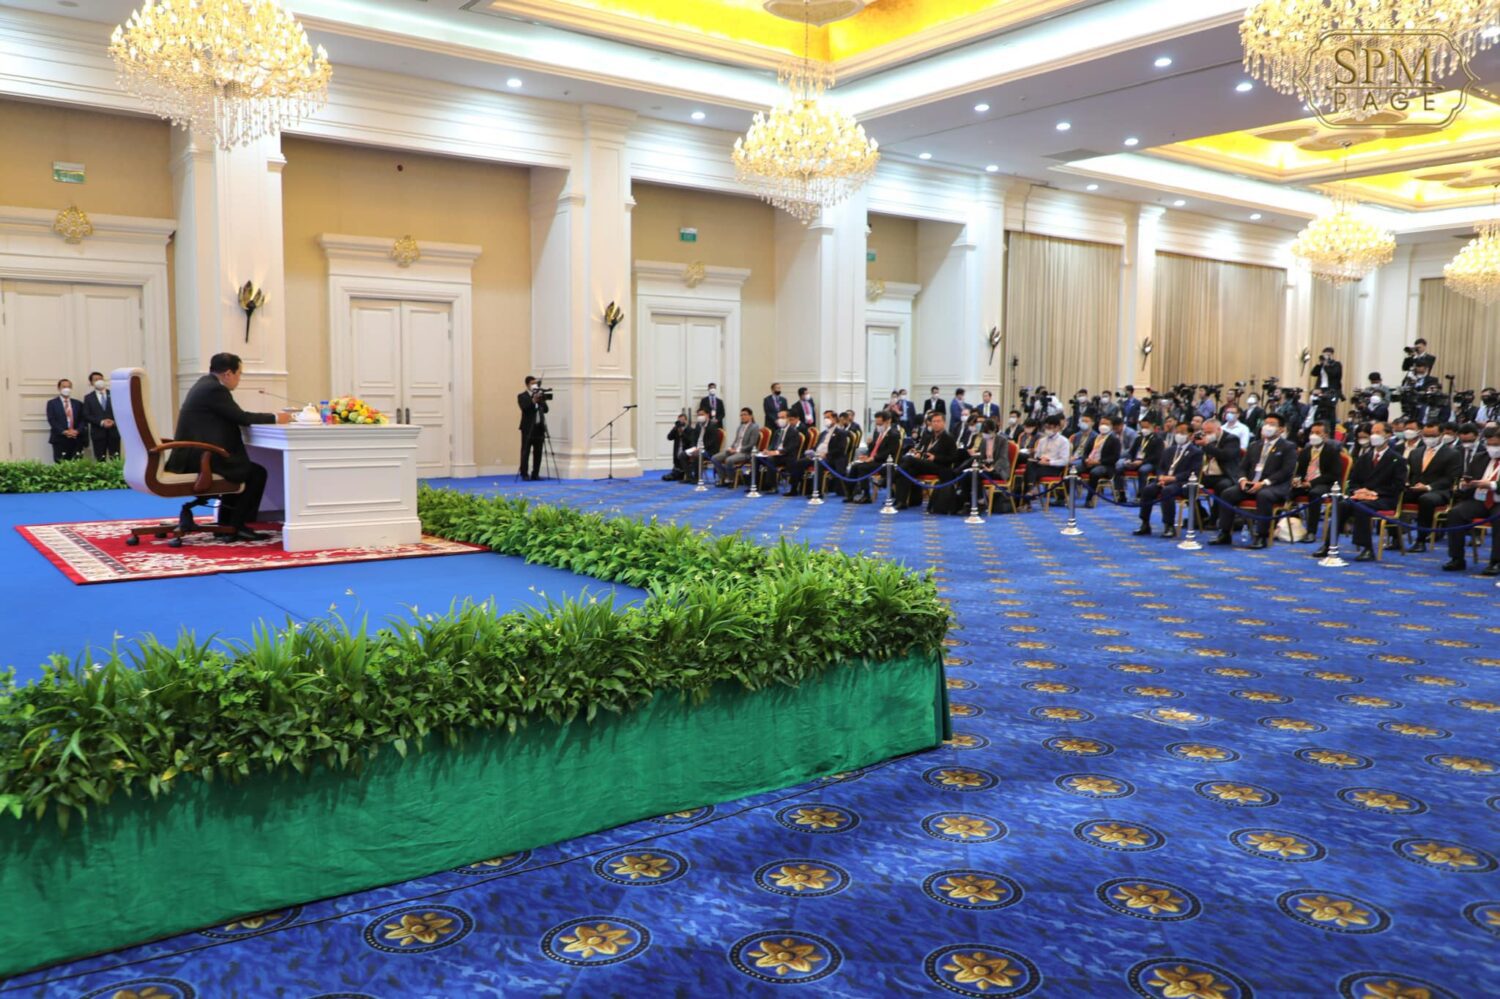 Prime Minister Hun Sen speaks at a press conference at the Peace Palace in Phnom Penh on November 13, 2022. (Hun Sen's Facebook page)